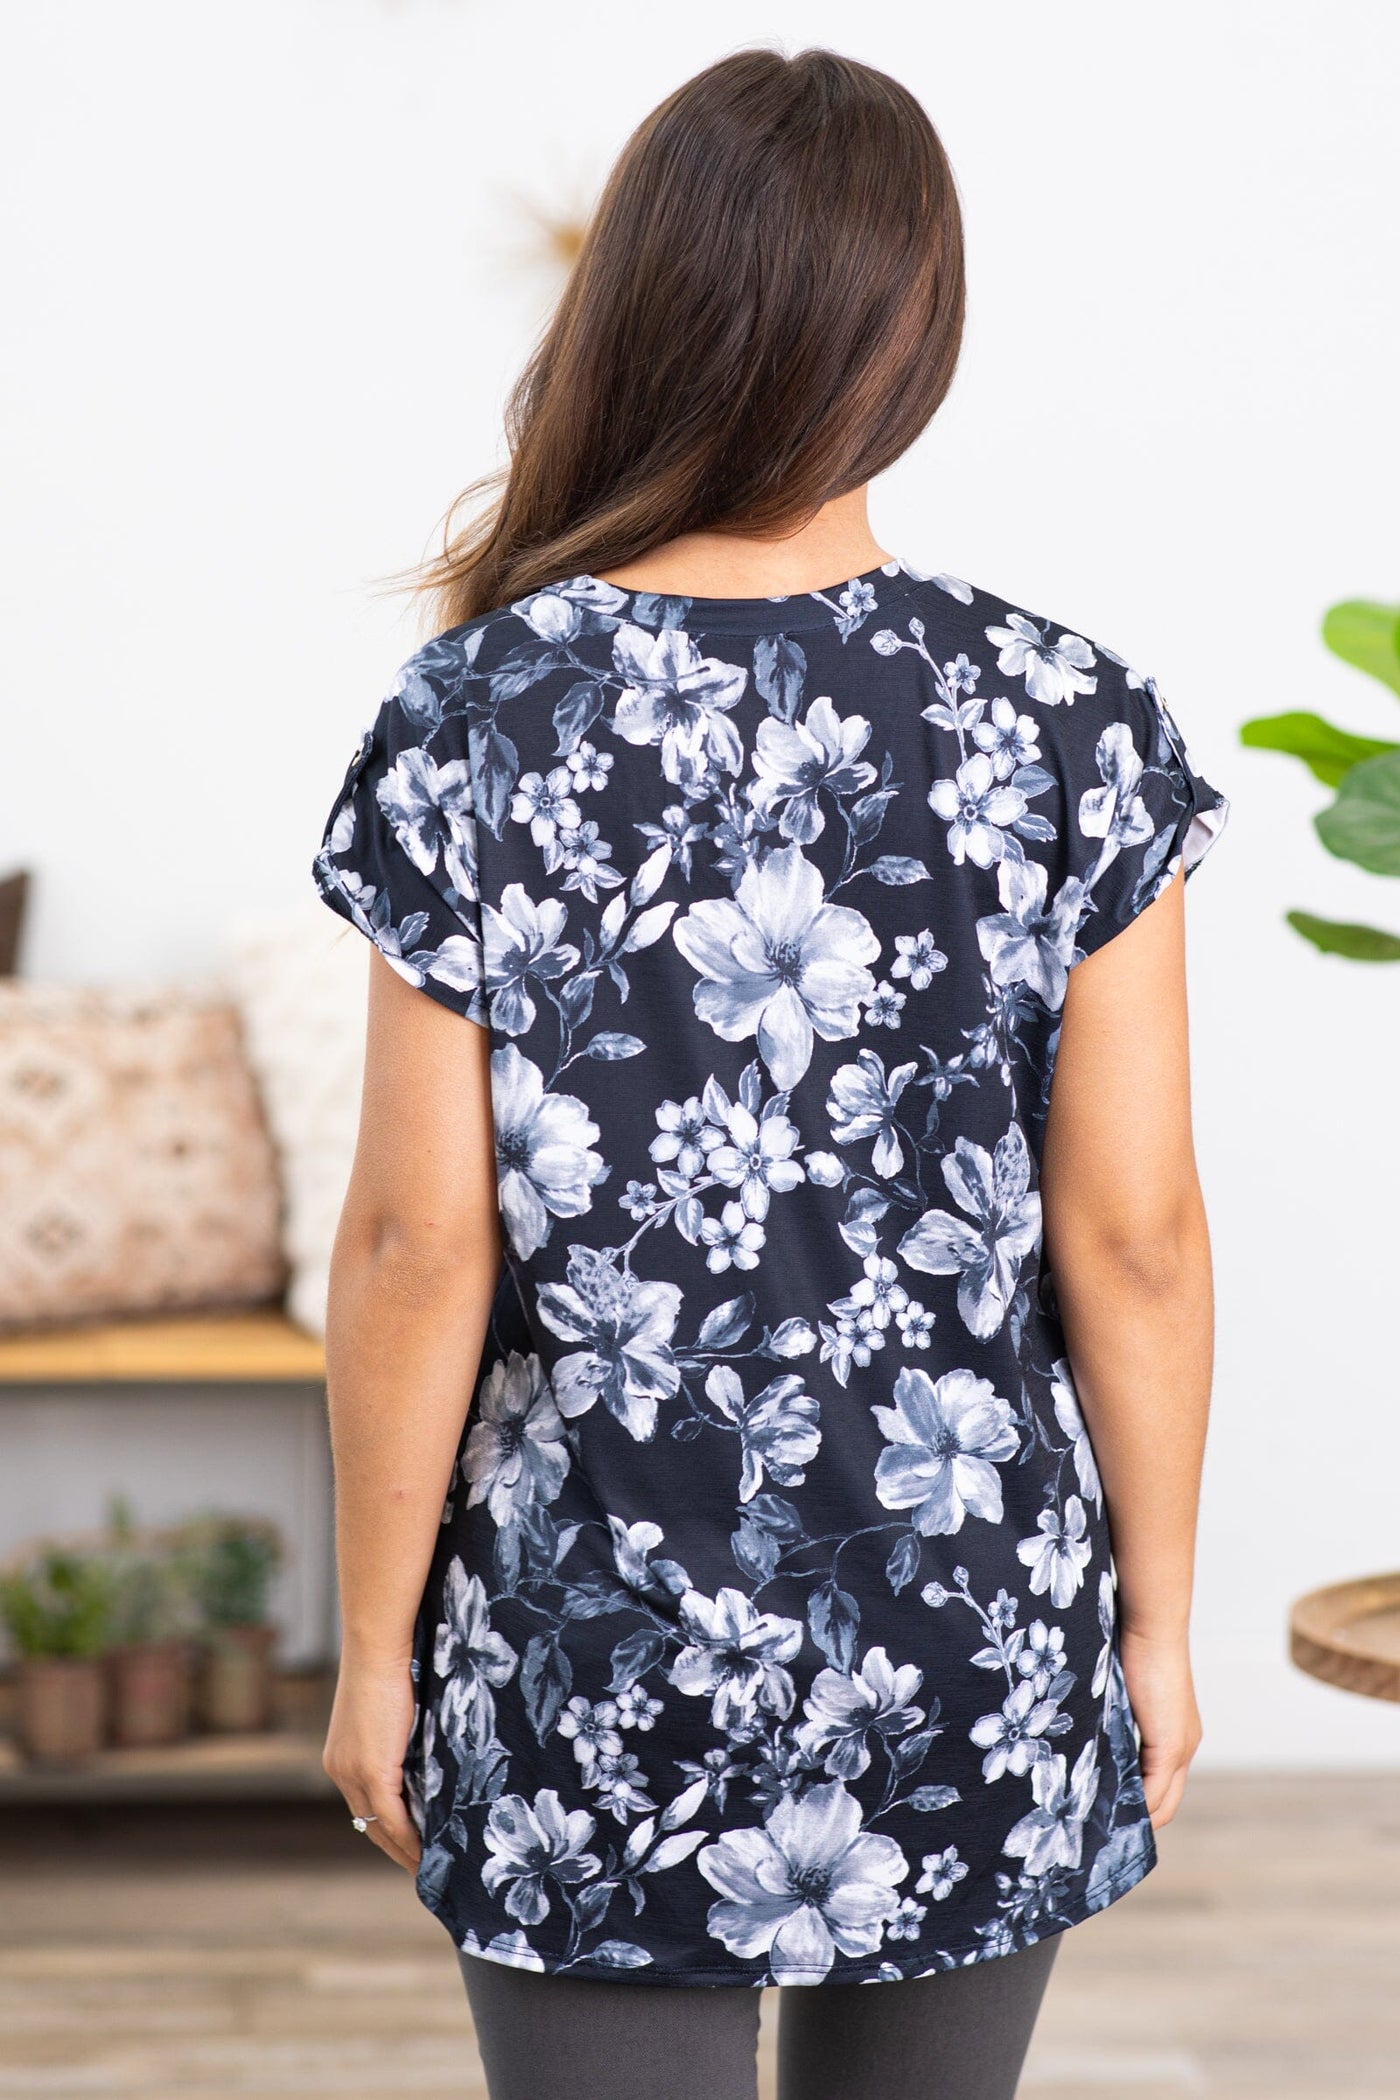 Black and Grey Floral Print V-Neck Top - Filly Flair